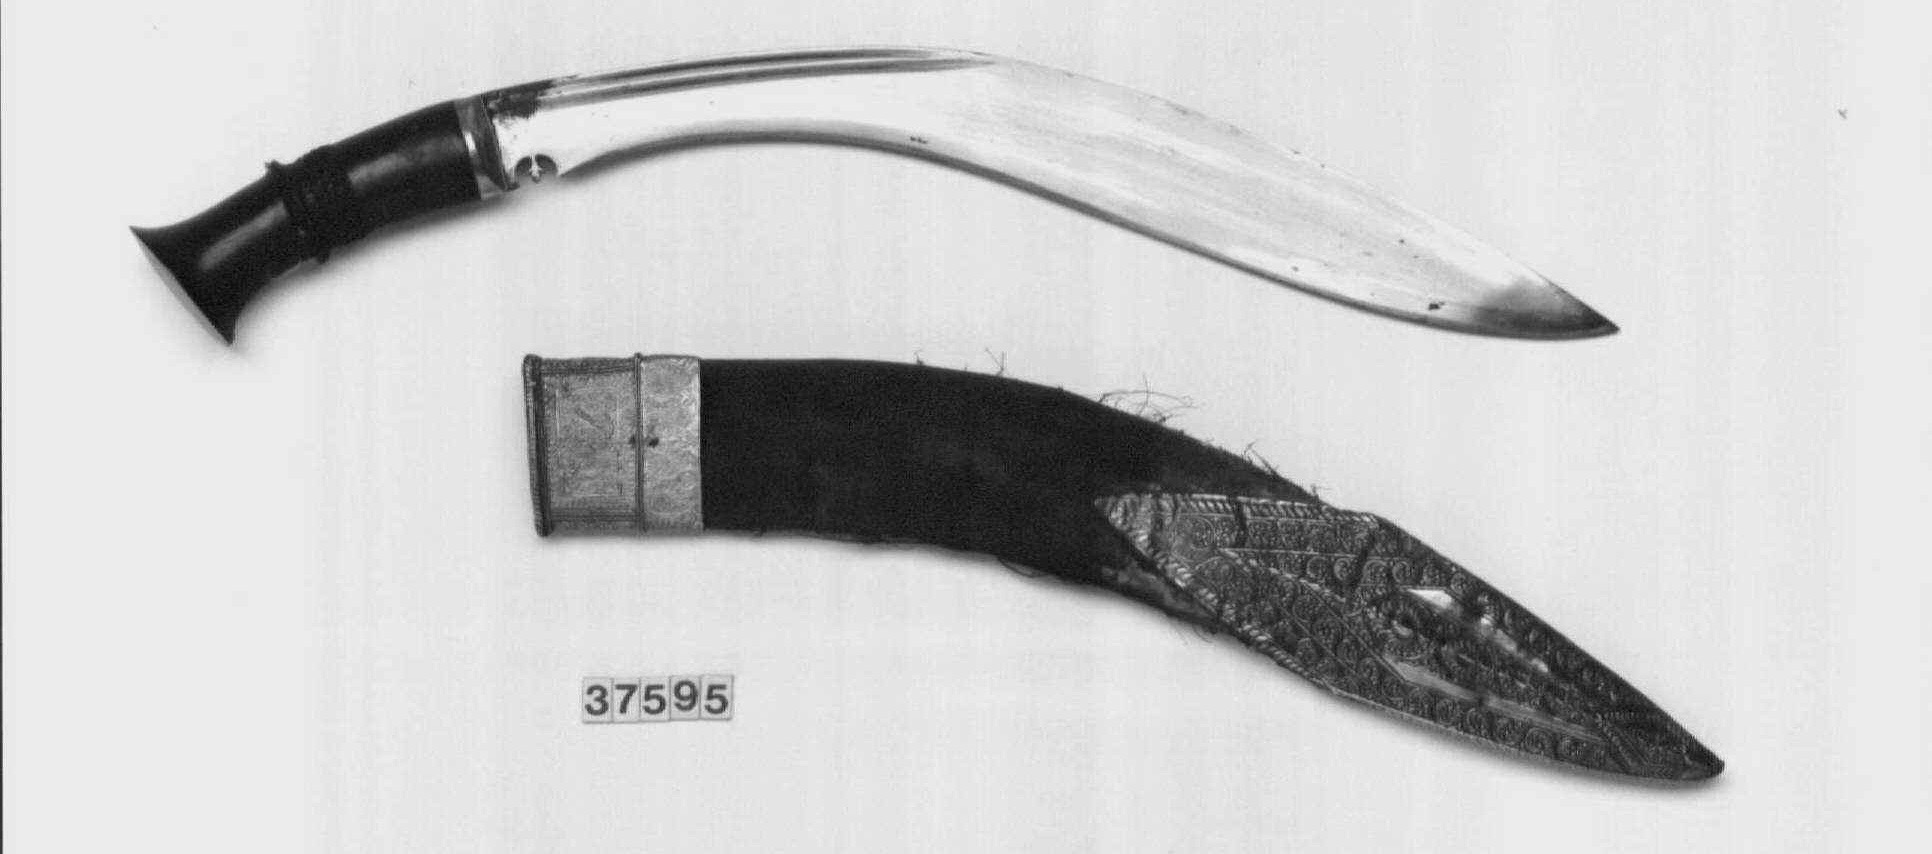 Kukri in the British Royal collection